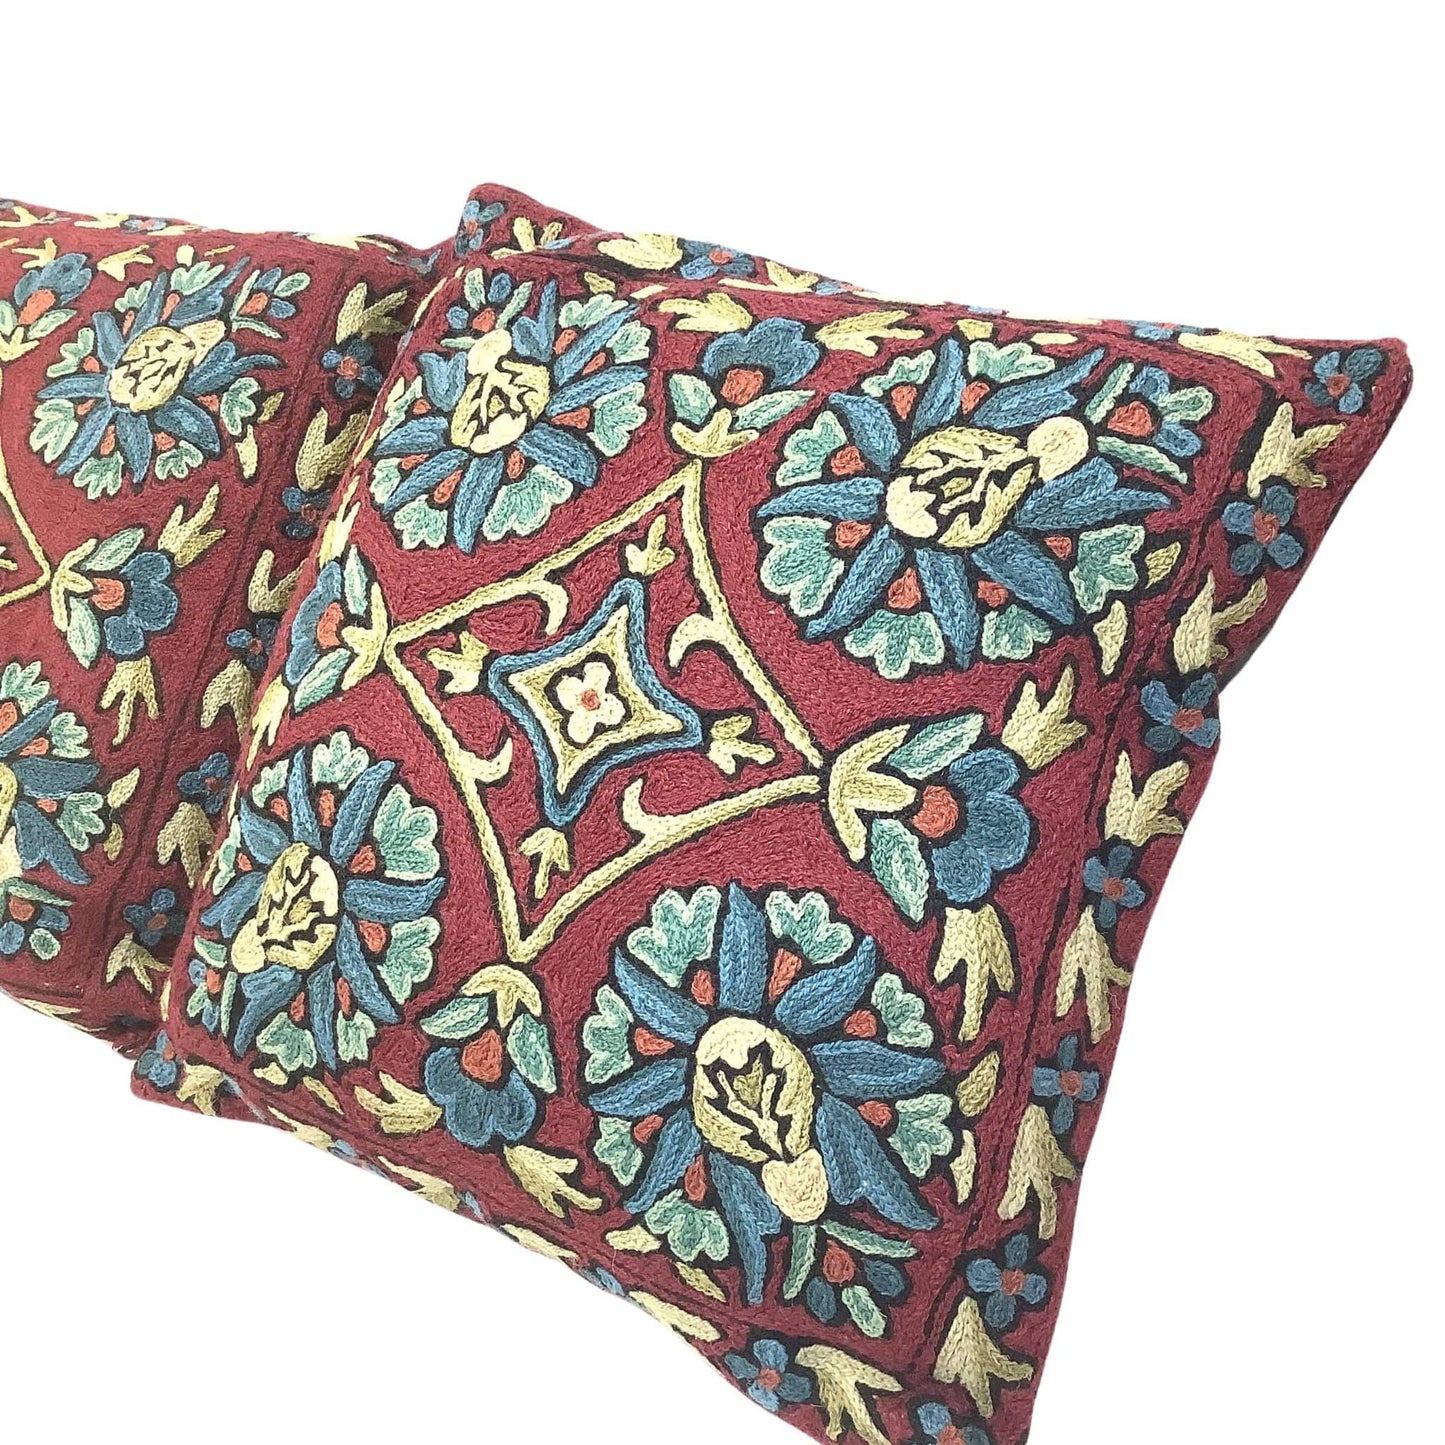 Crewel Embroidered Pillows Multi / Mixed / Classic